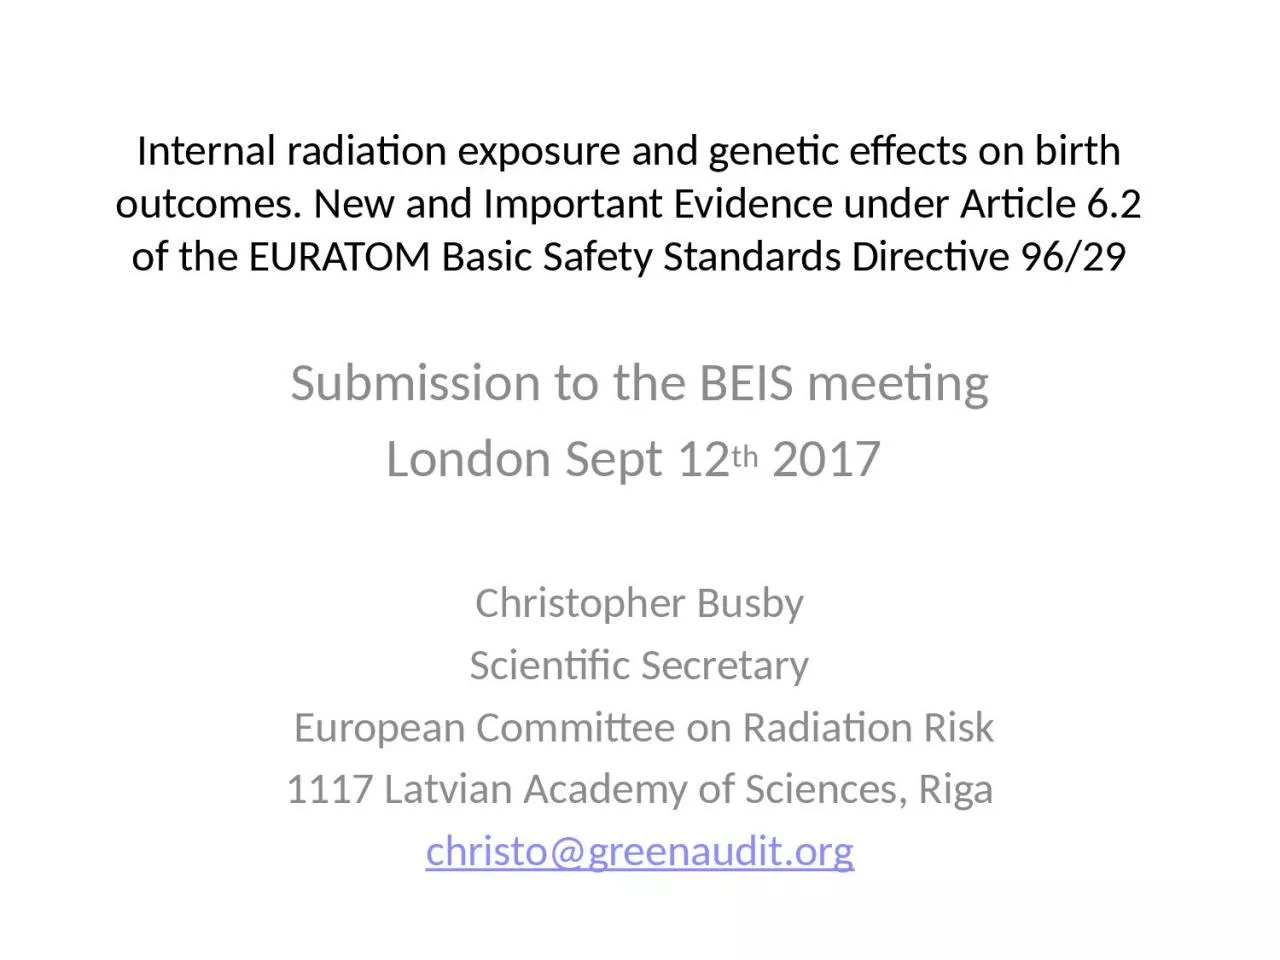 Internal radiation exposure and genetic effects on birth outcomes. New and Important Evidence